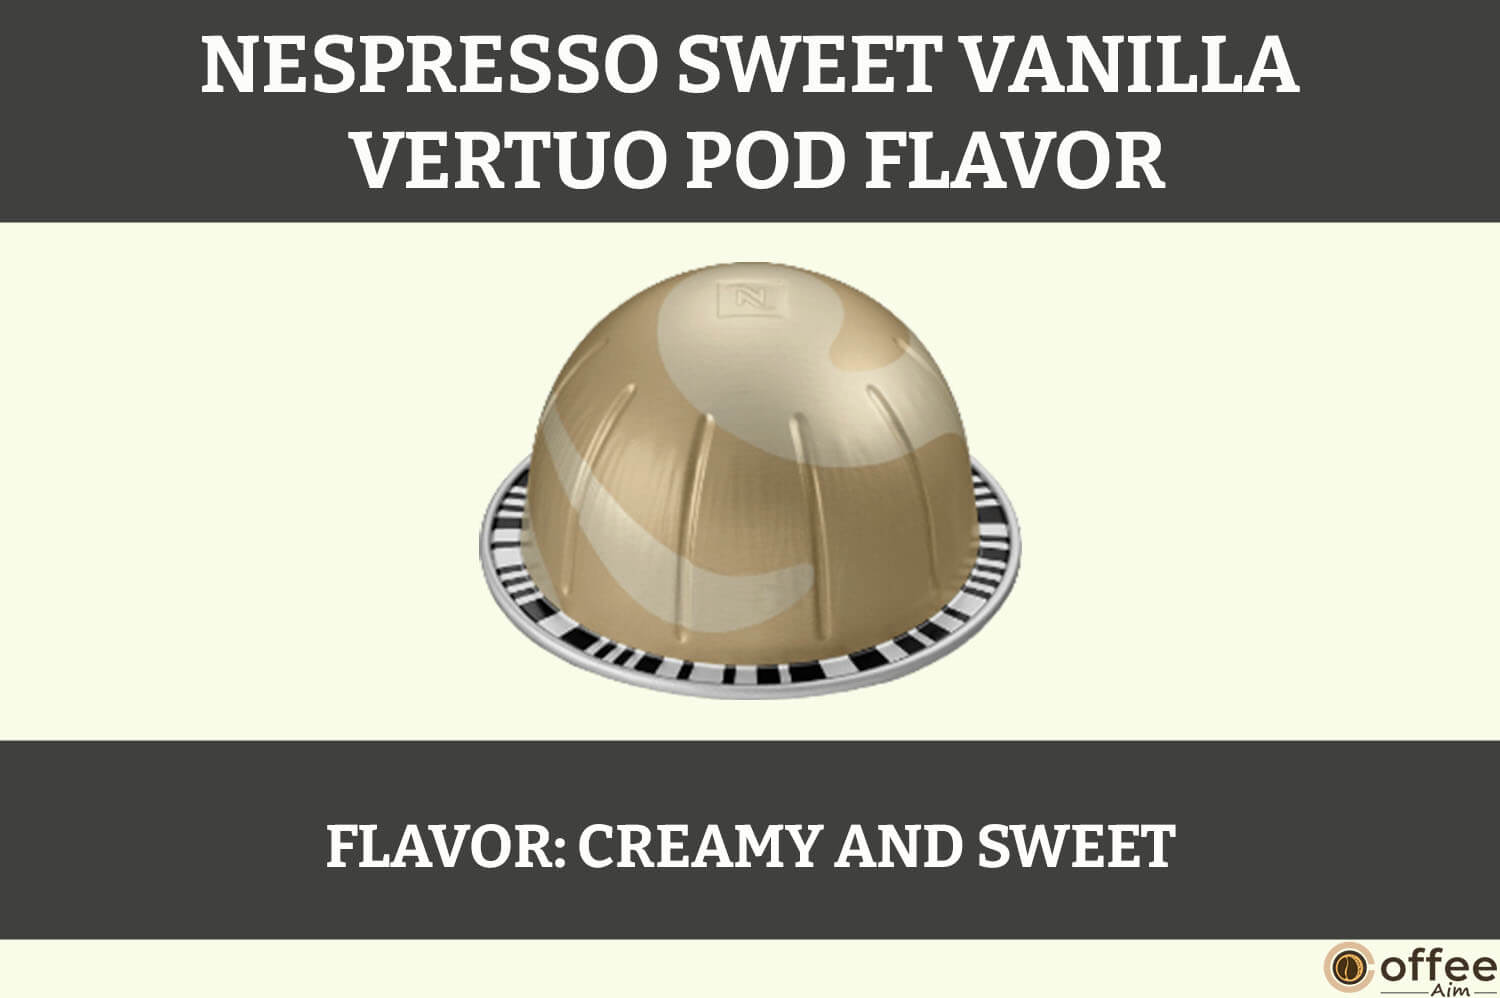 This image represents the flavor of Nespresso Sweet Vanilla Vertuo Pod for the article 'Nespresso Sweet Vanilla Vertuo Pod Review.